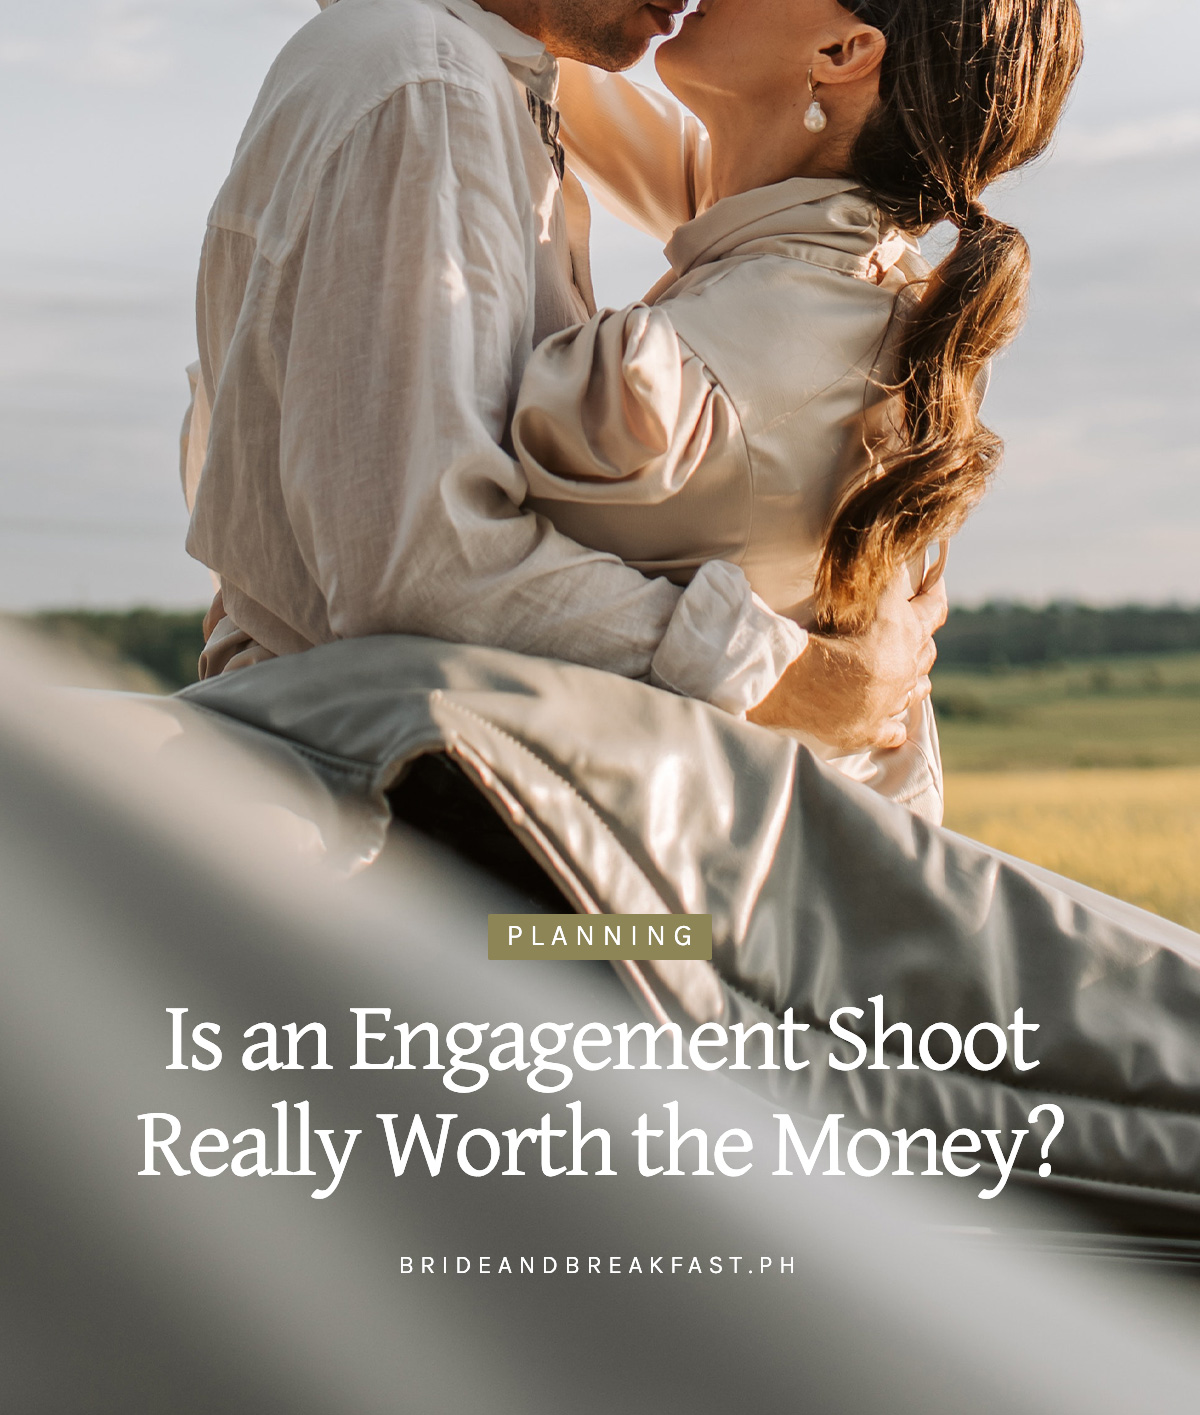 Is an Engagement Shoot Really Worth the Money?